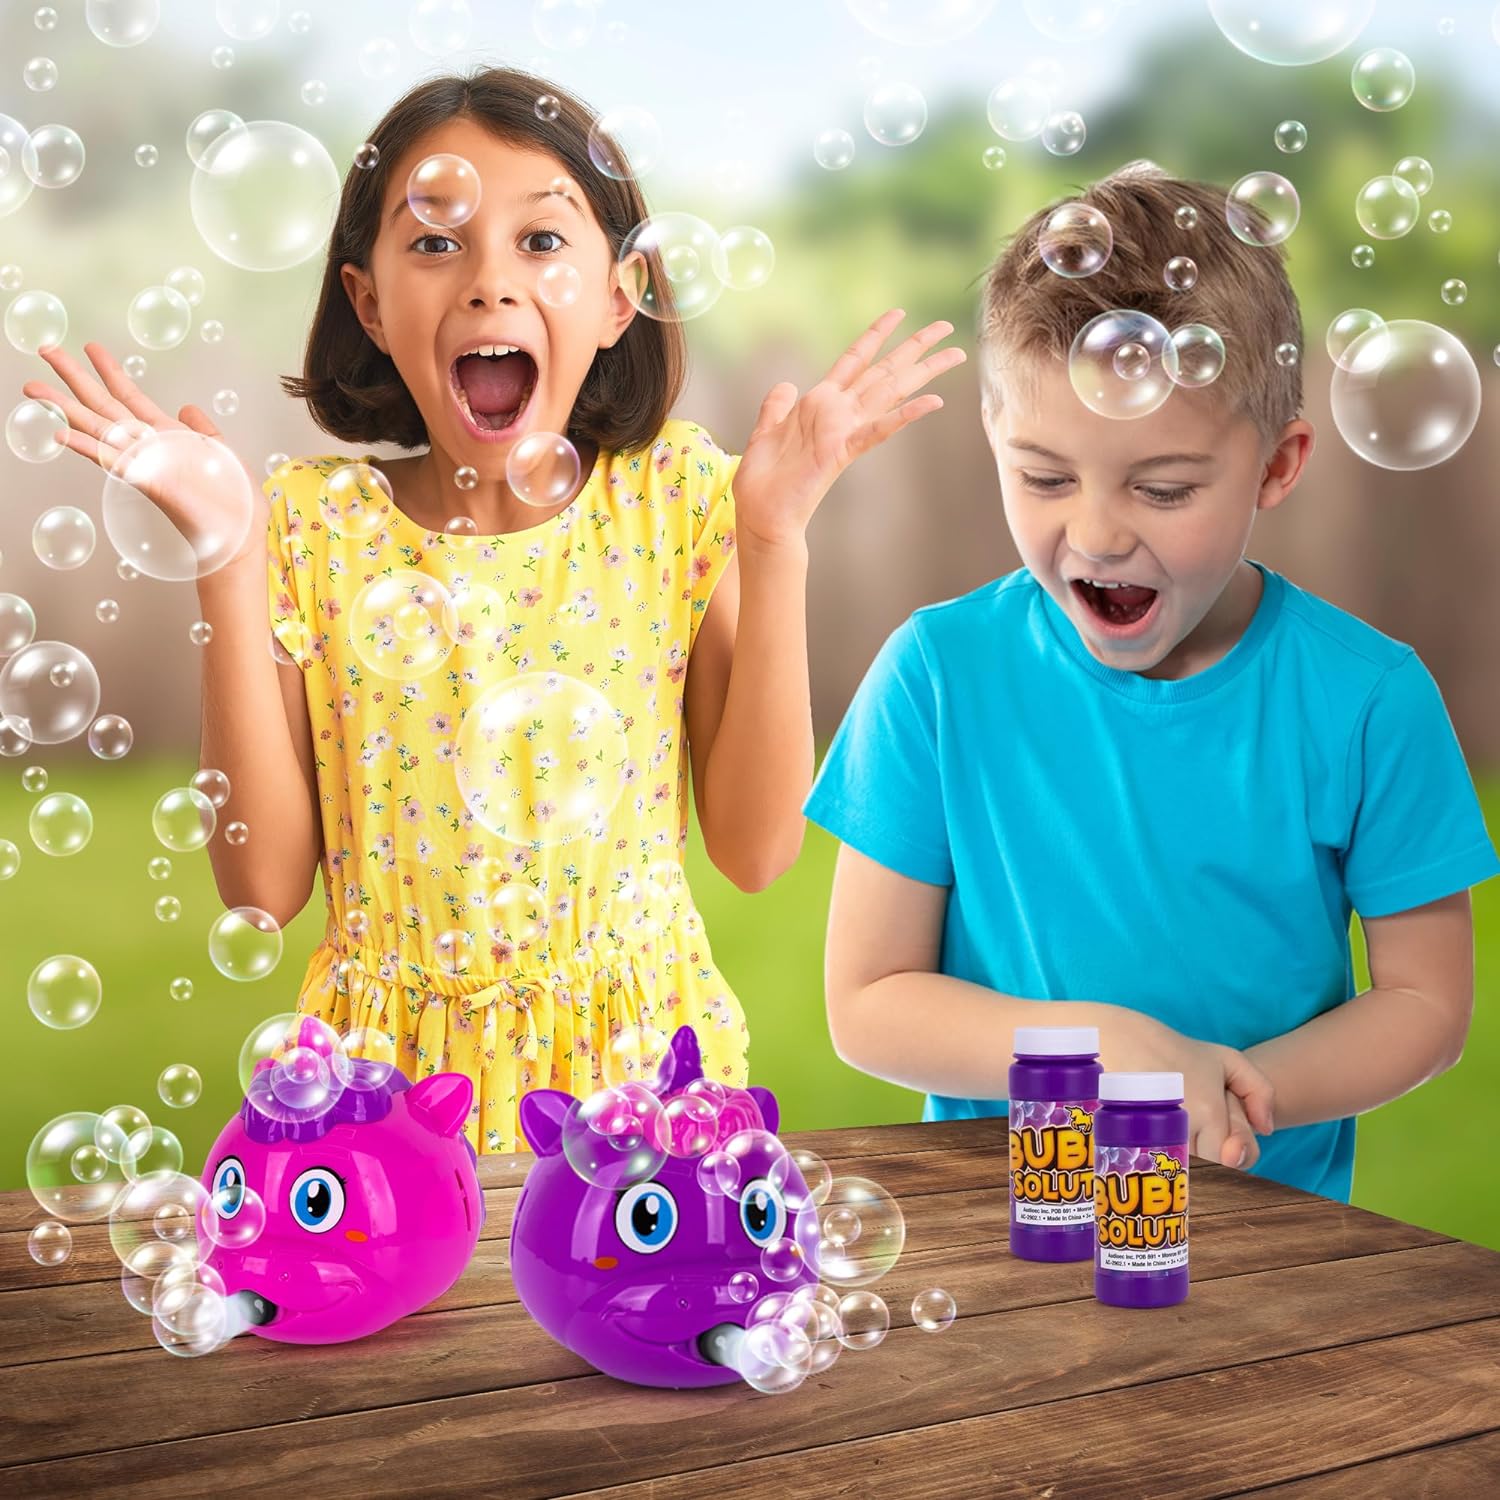 Unicorn Bubble Machine for Kids, Set of 2, Bubble Blower with Bubble Solution Included, Pink & Purple Unicorn Bubble Toys for Girls & Boys